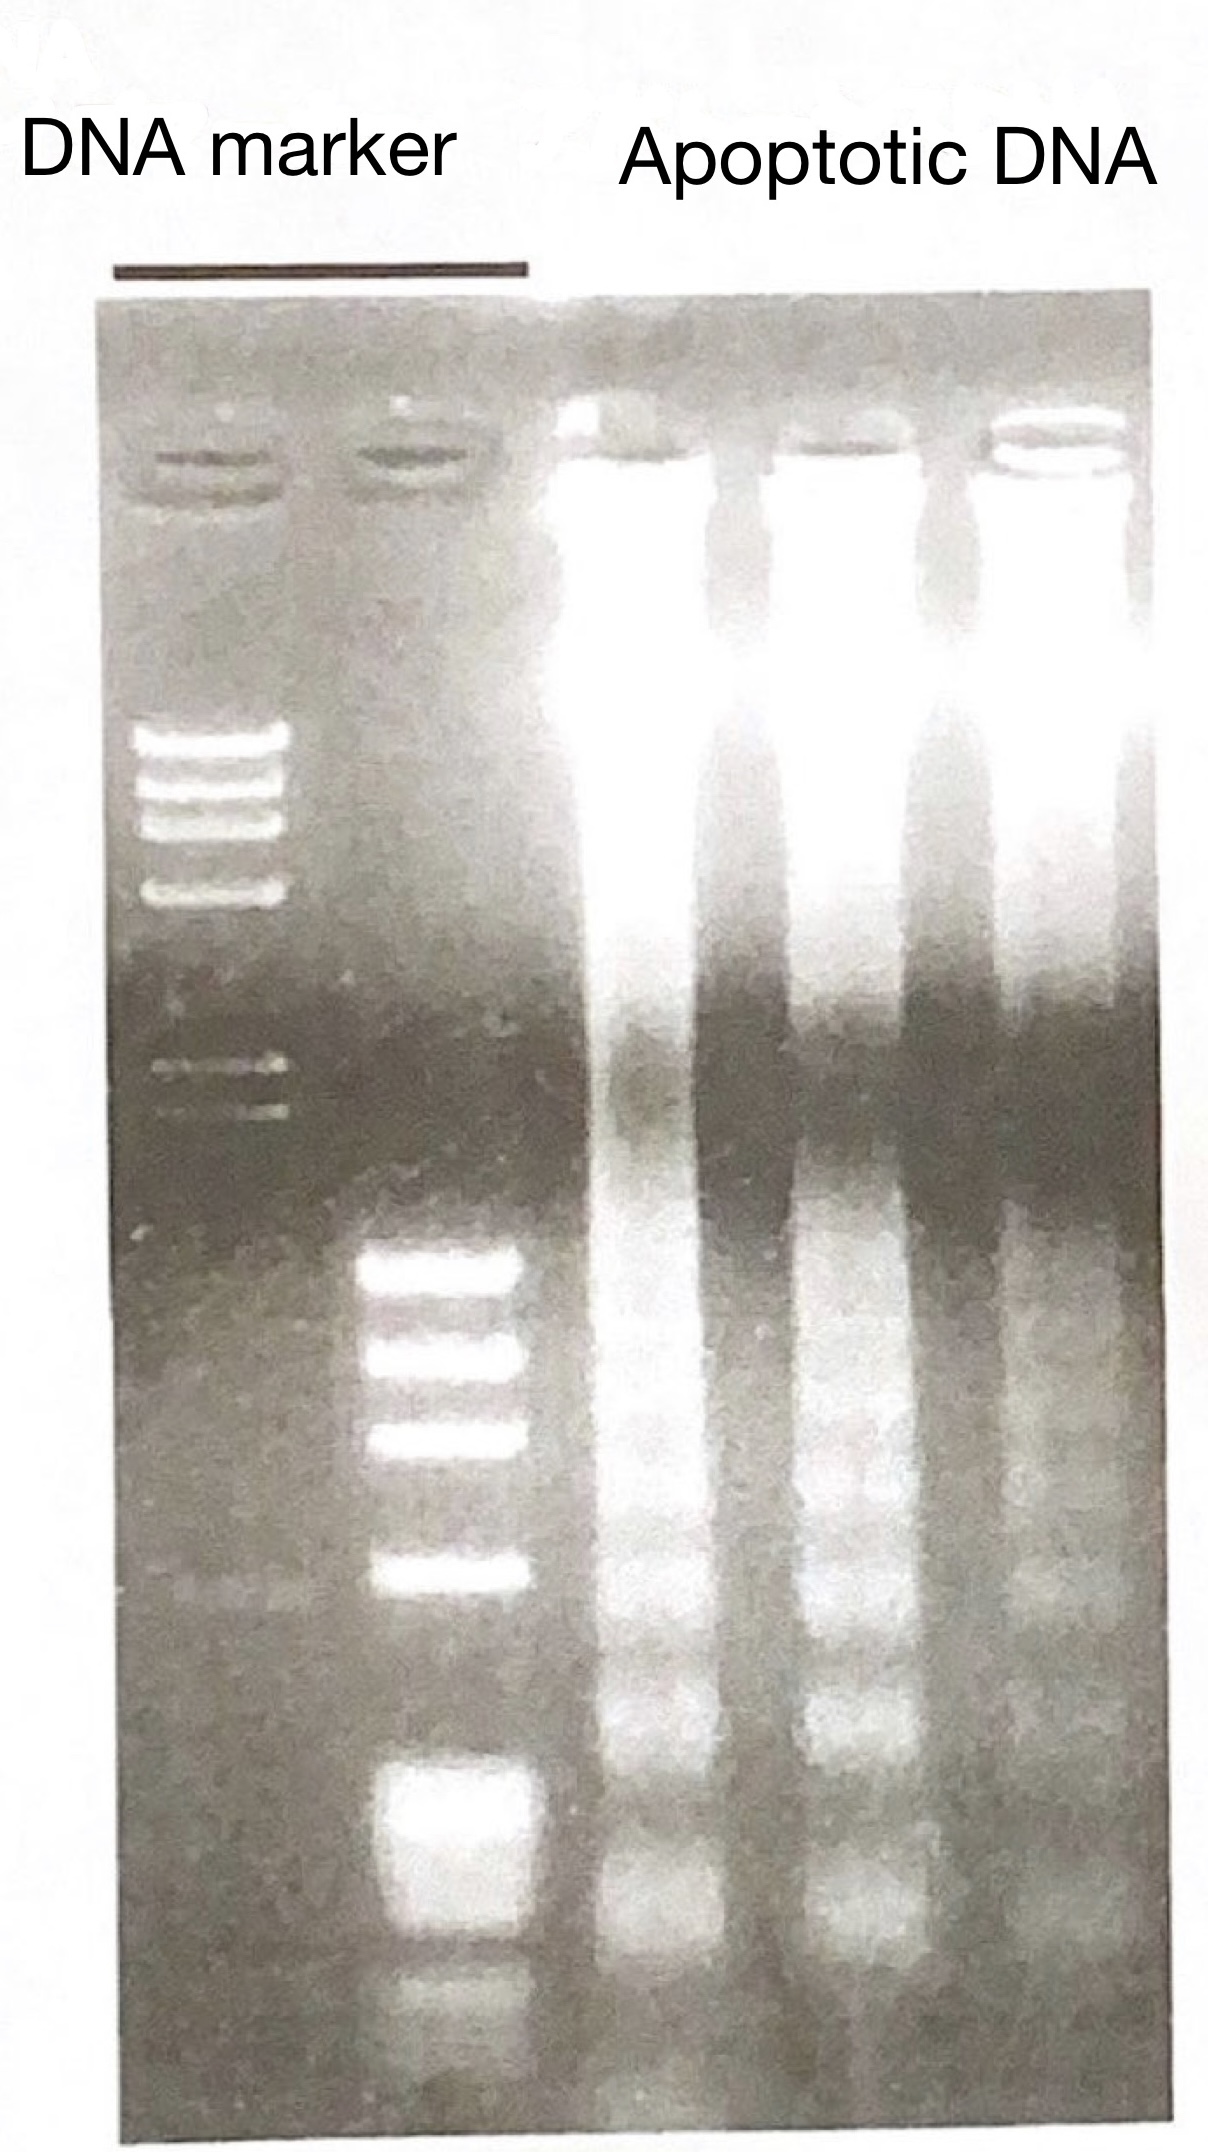 <p>702</p><p>The figure shows the result of agarose electrophoresis of the DNA of apoptotic cells.</p><p>Step ladder is  integral multiple of how many base pairs?</p><p></p><p>a 90</p><p>b 180</p><p>c 270</p><p>d 360</p><p>e 450</p>